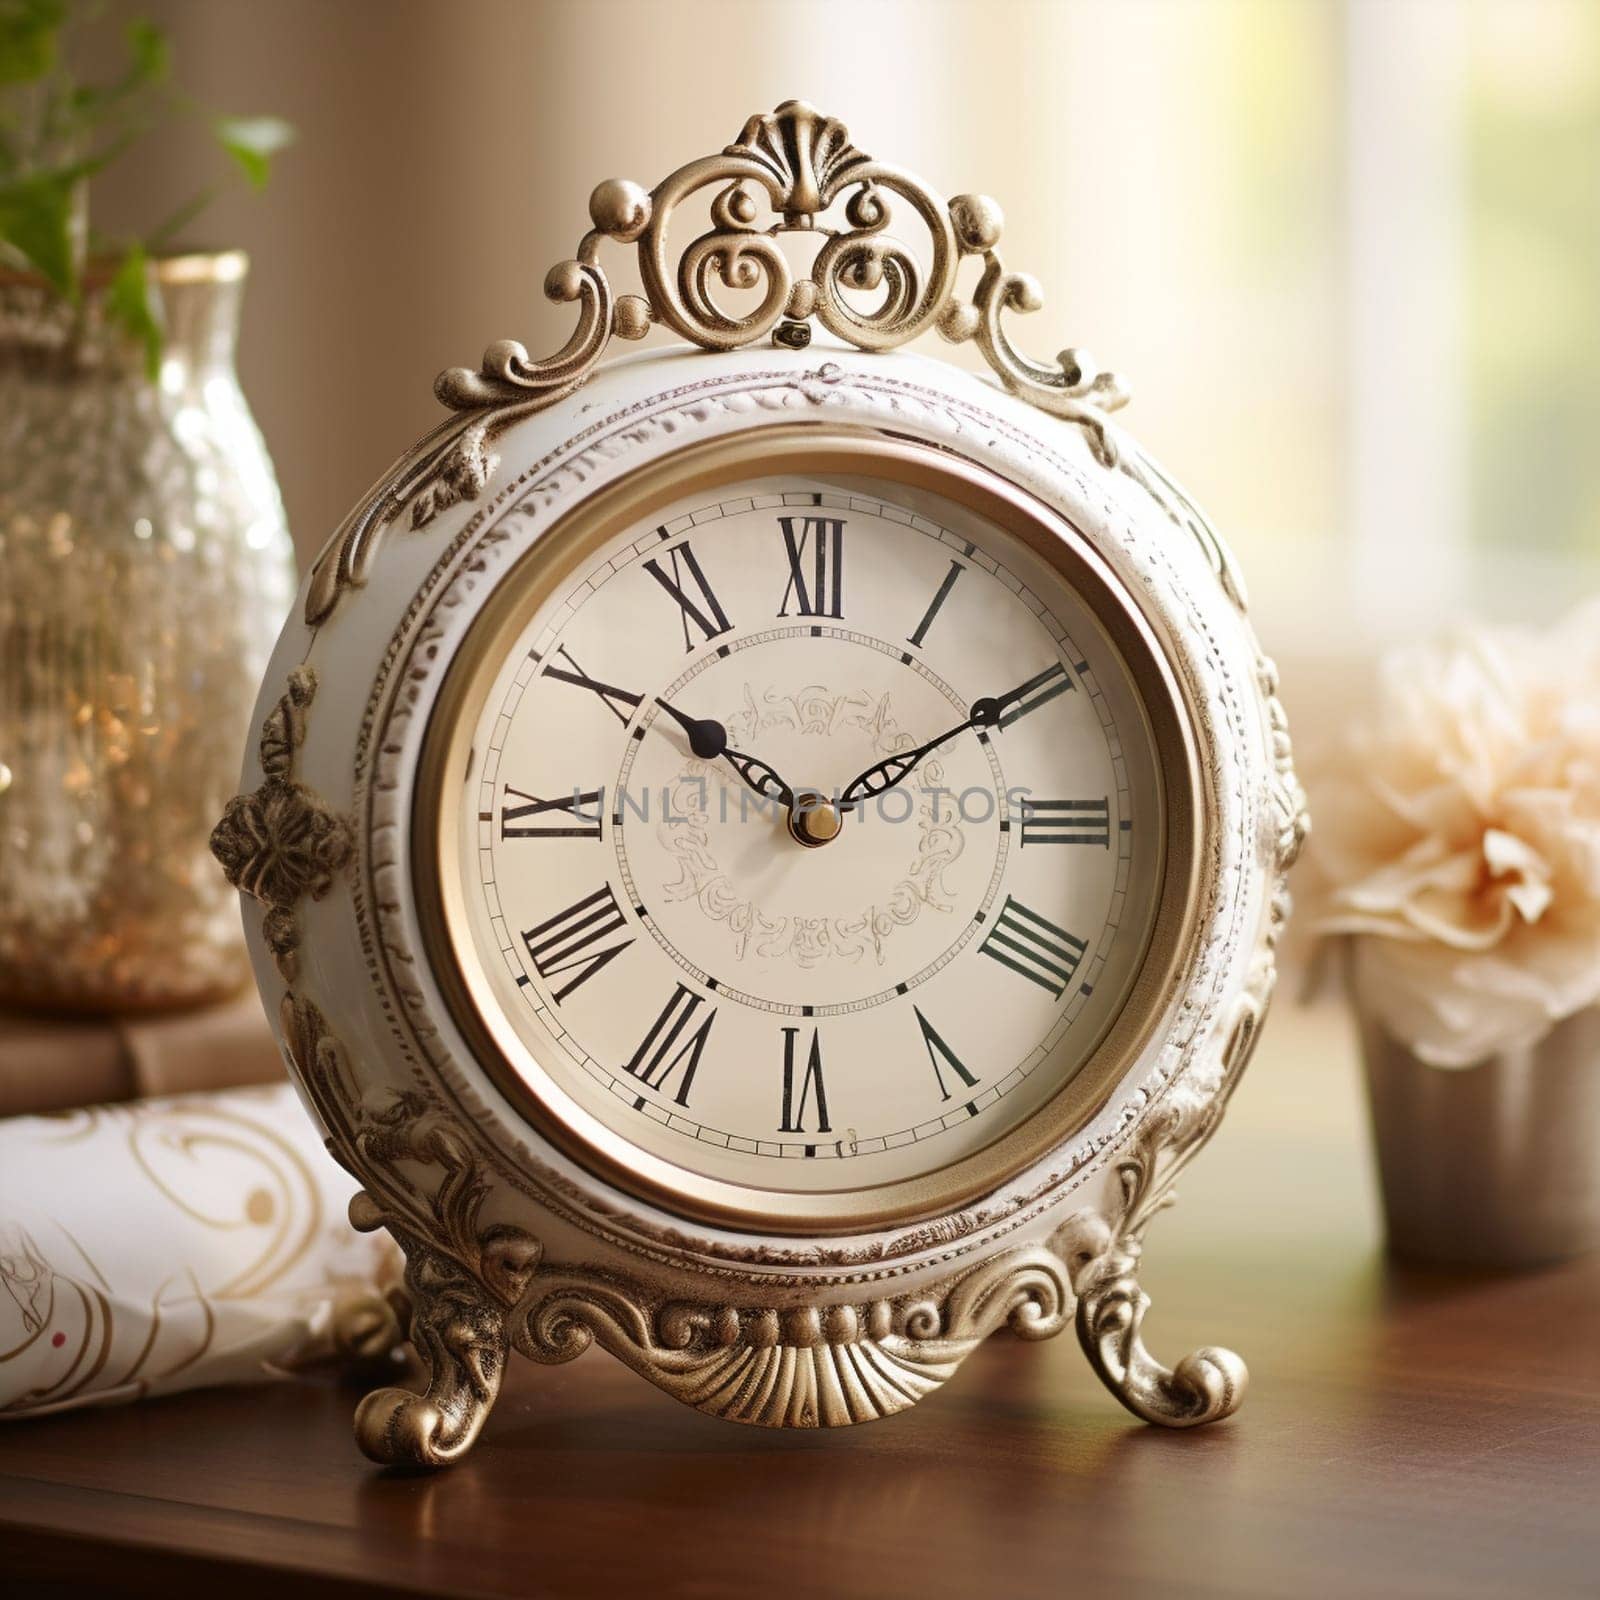 Step back in time with this vintage-inspired clock that exudes timeless elegance. Crafted with intricate details, this timepiece showcases ornate engravings, delicate filigree work, and antique finishing. The classic charm of the clock is emphasized through the incorporation of Roman numerals, dainty clock hands, and a subtle backdrop that hints at the passage of time. The overall composition exudes sophistication and evokes nostalgia, emulating the aesthetics of vintage engravings. The rich textures and subdued color palette add to the vintage appeal.